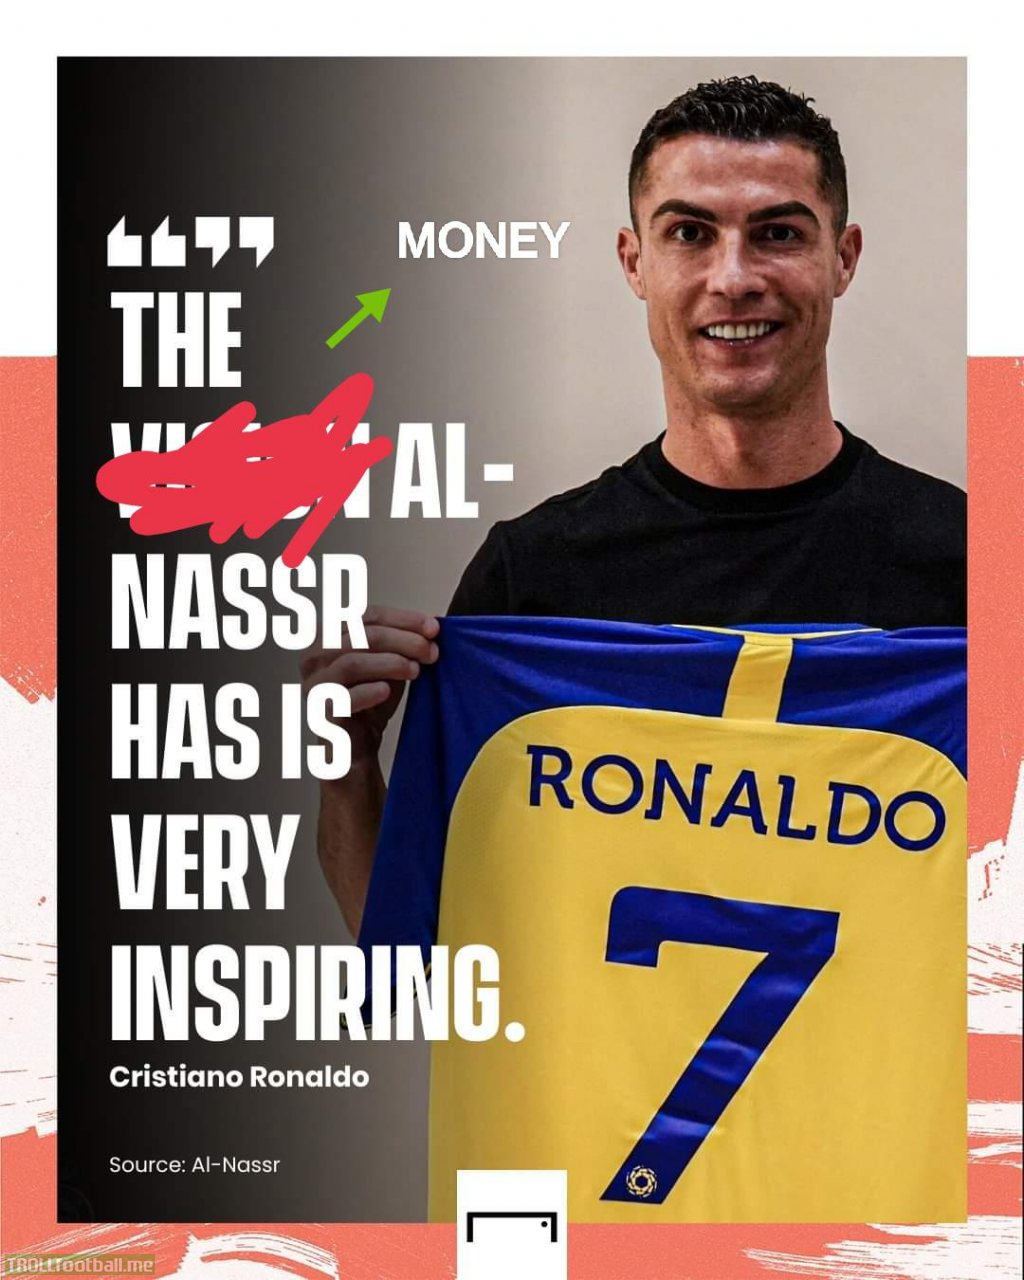 Fixed it for you CR7